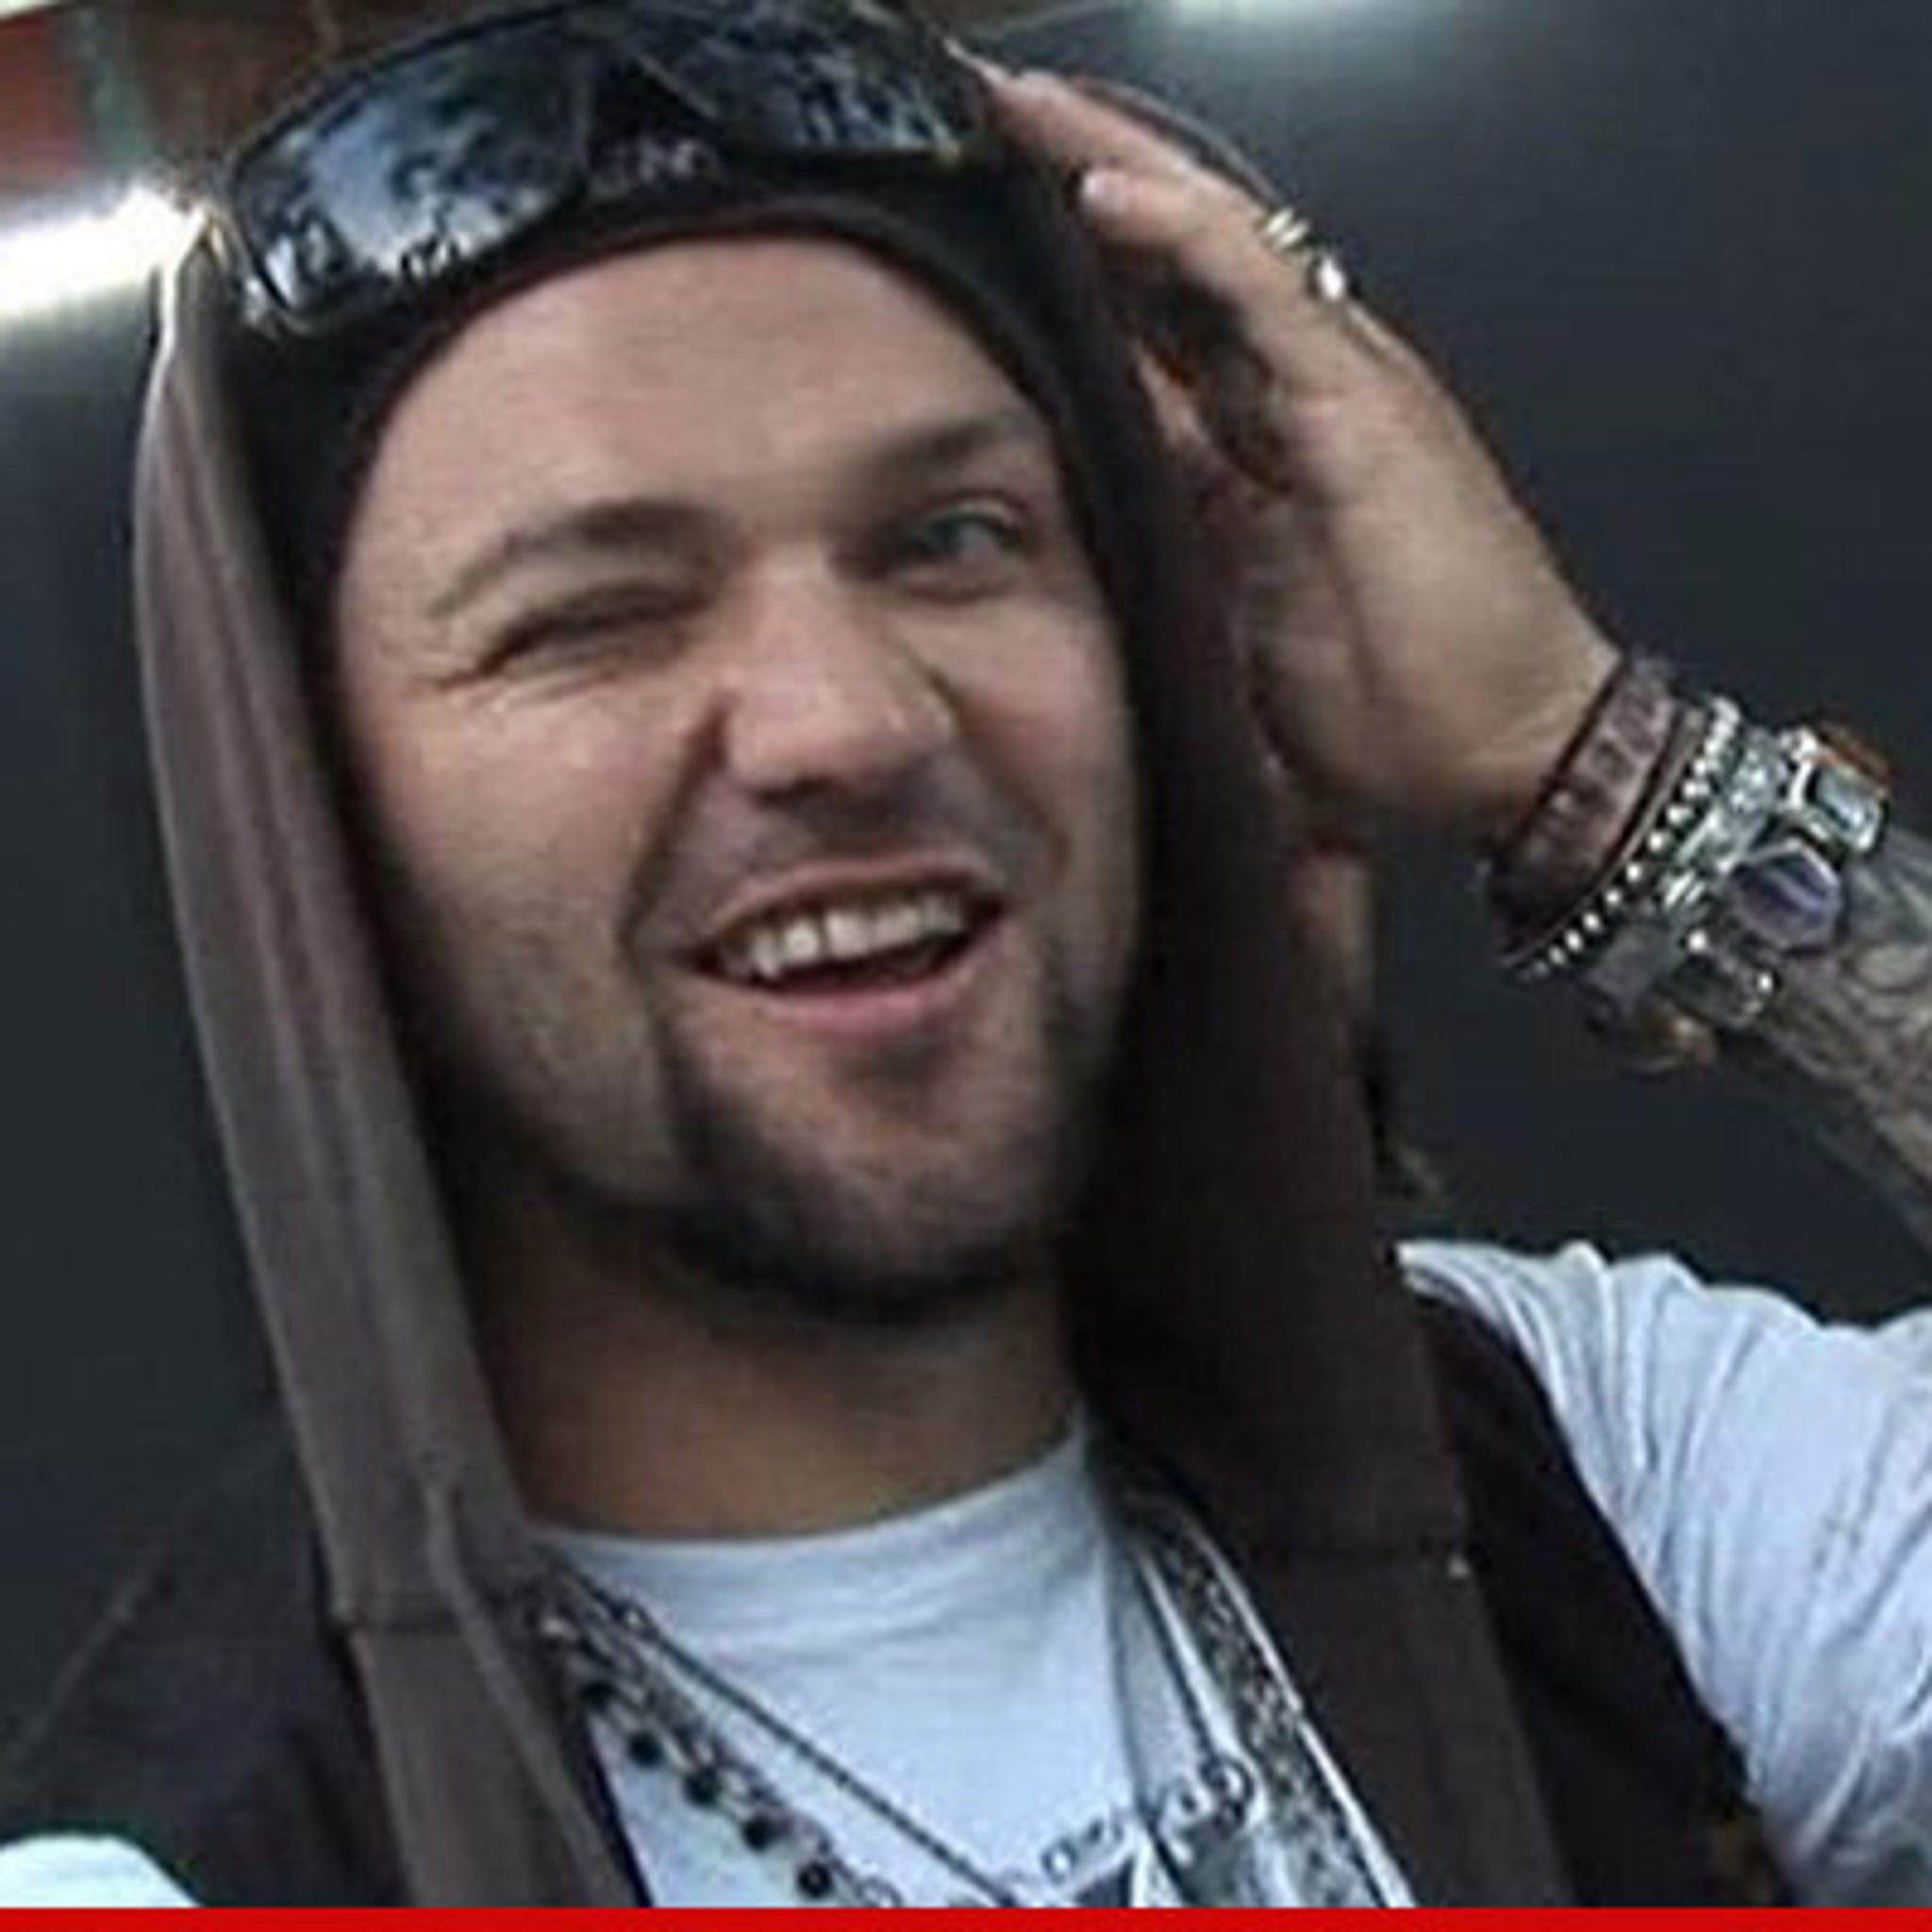 Bam Margera -- Naked Chick Broke INTO MY HOUSE, Started Masturbating photo picture